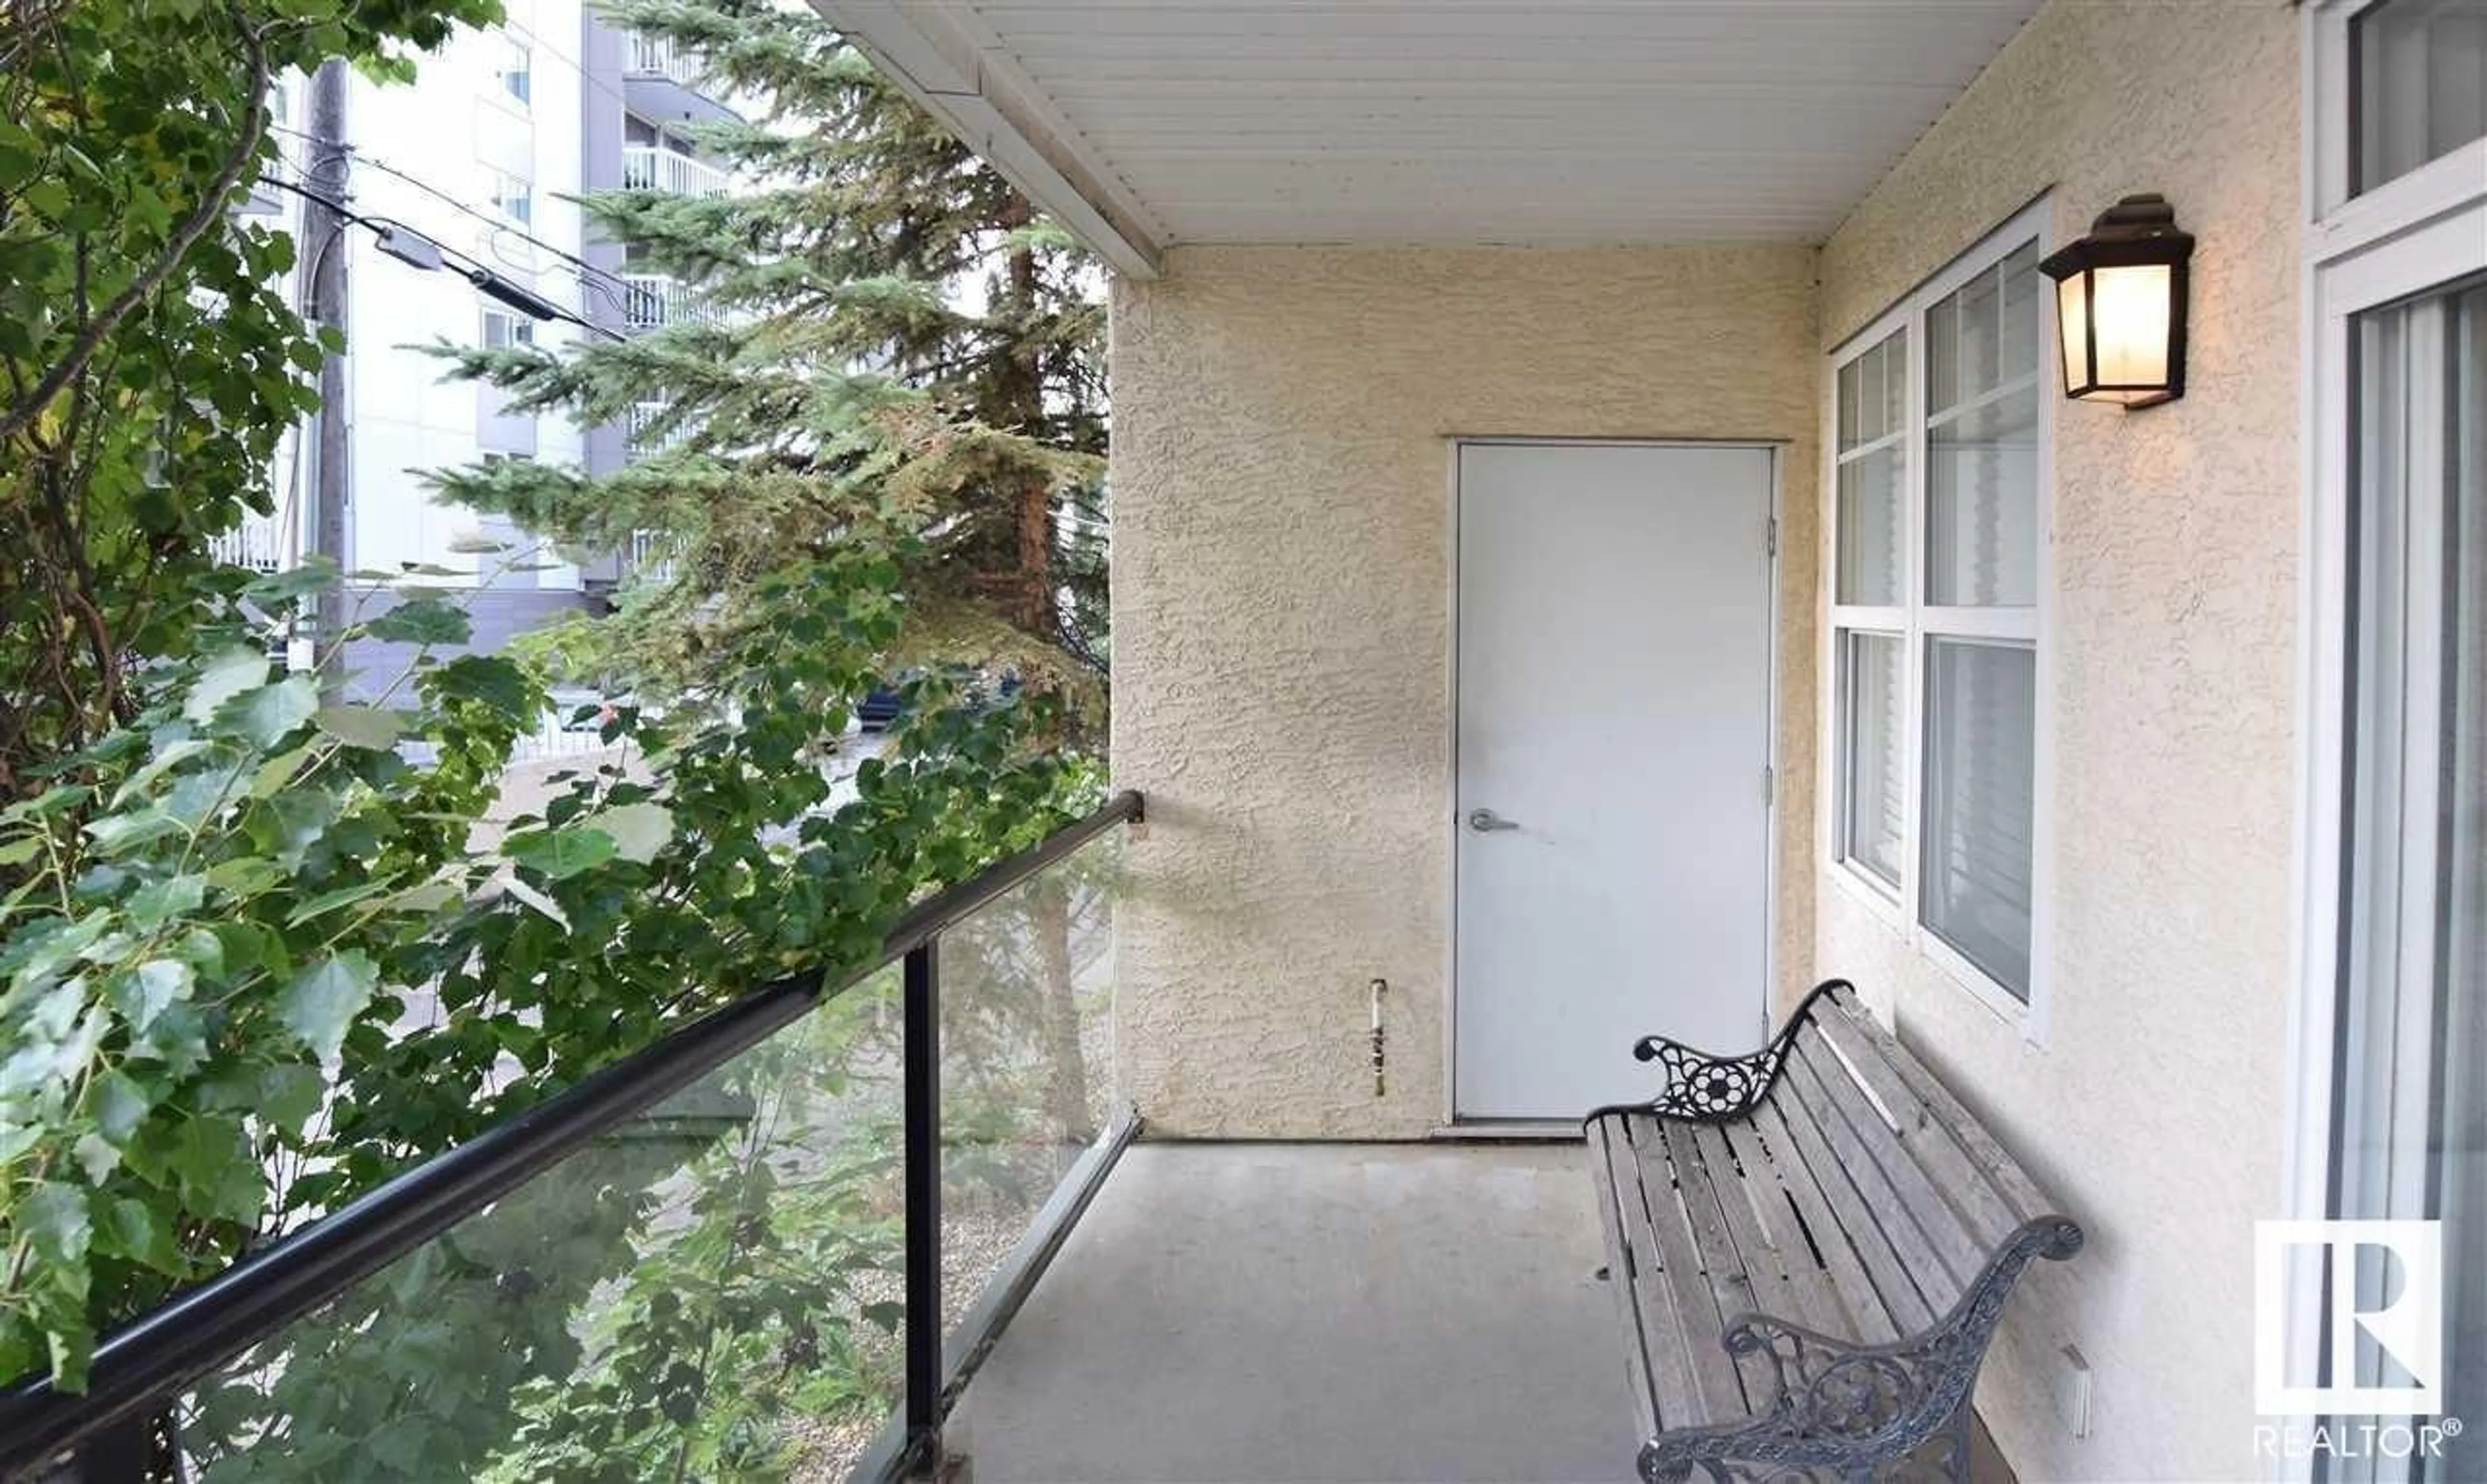 Balcony in the apartment for #106 9828 112 ST NW, Edmonton Alberta T5K1L4